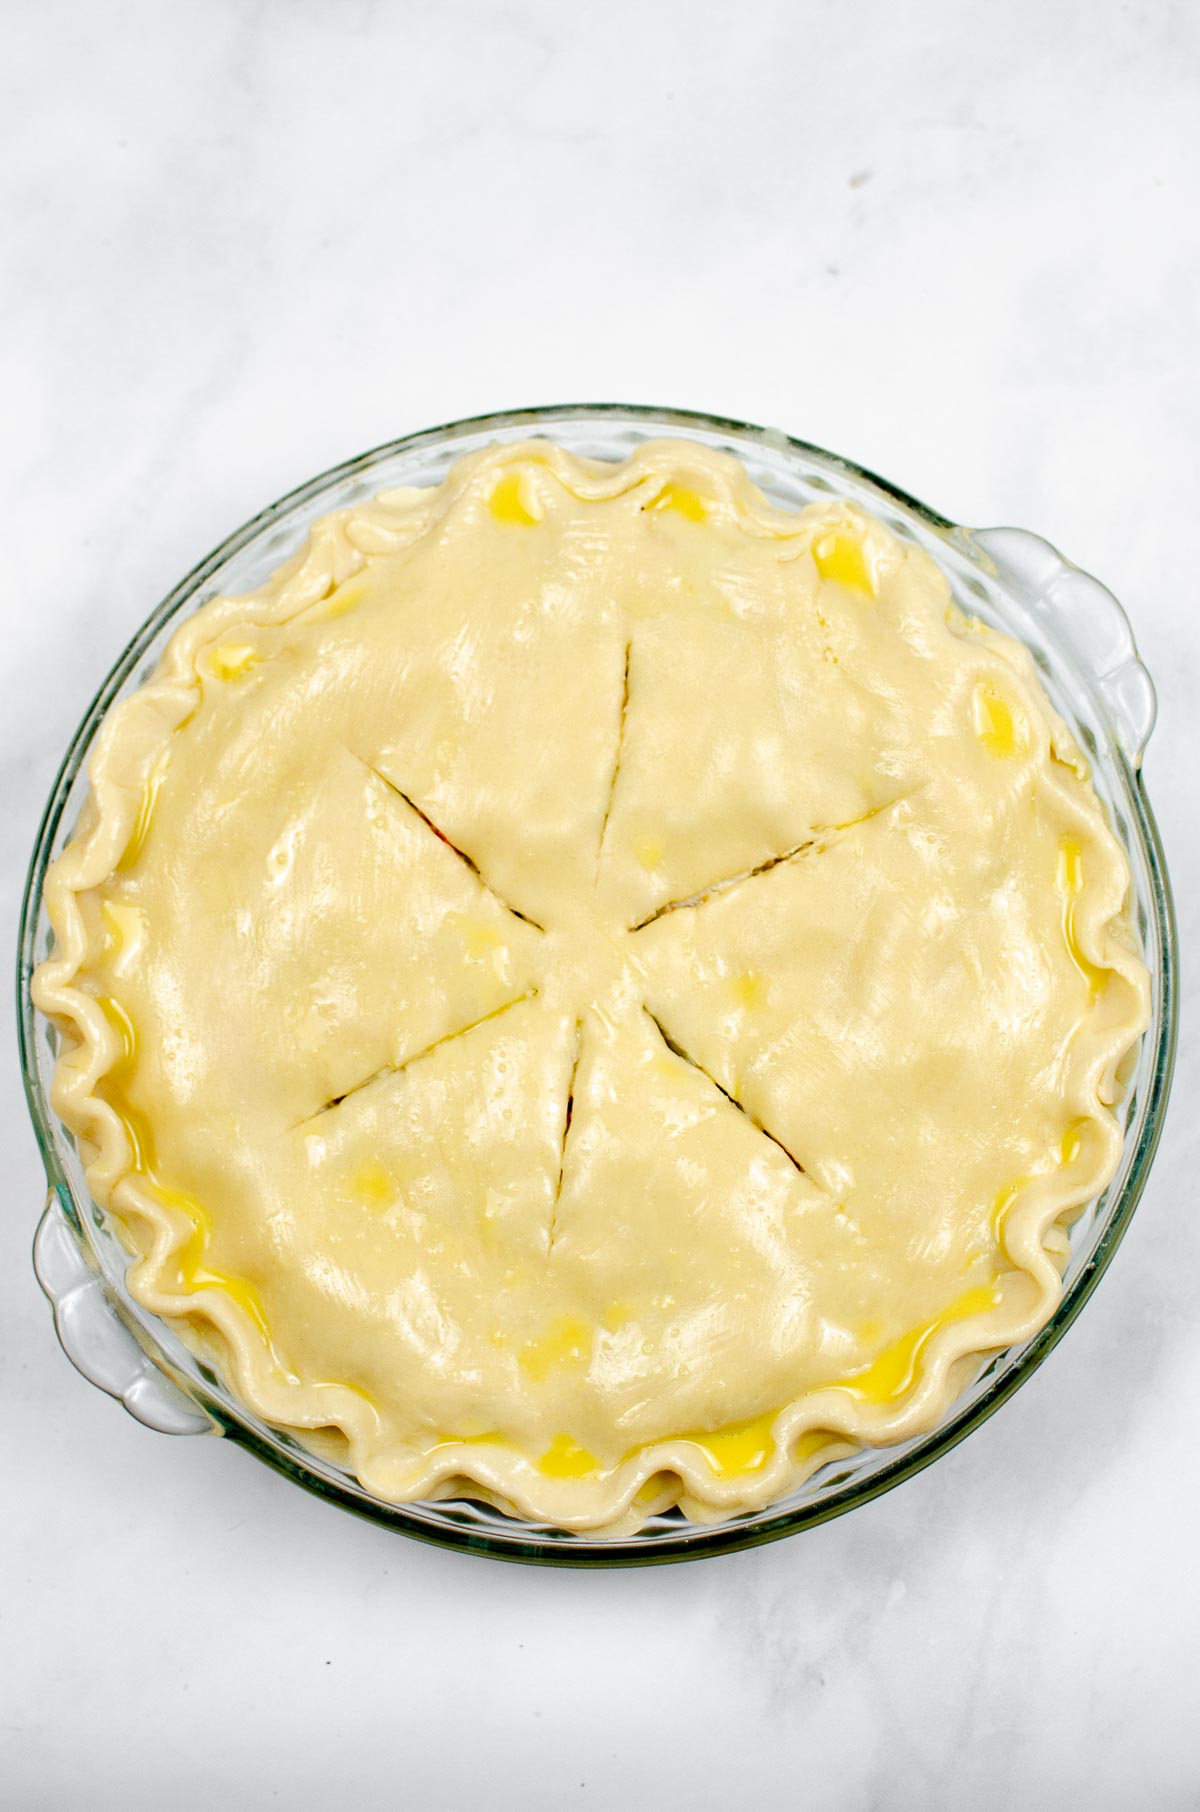 Uncooked turkey pot pie with the pie crust brushed with egg.